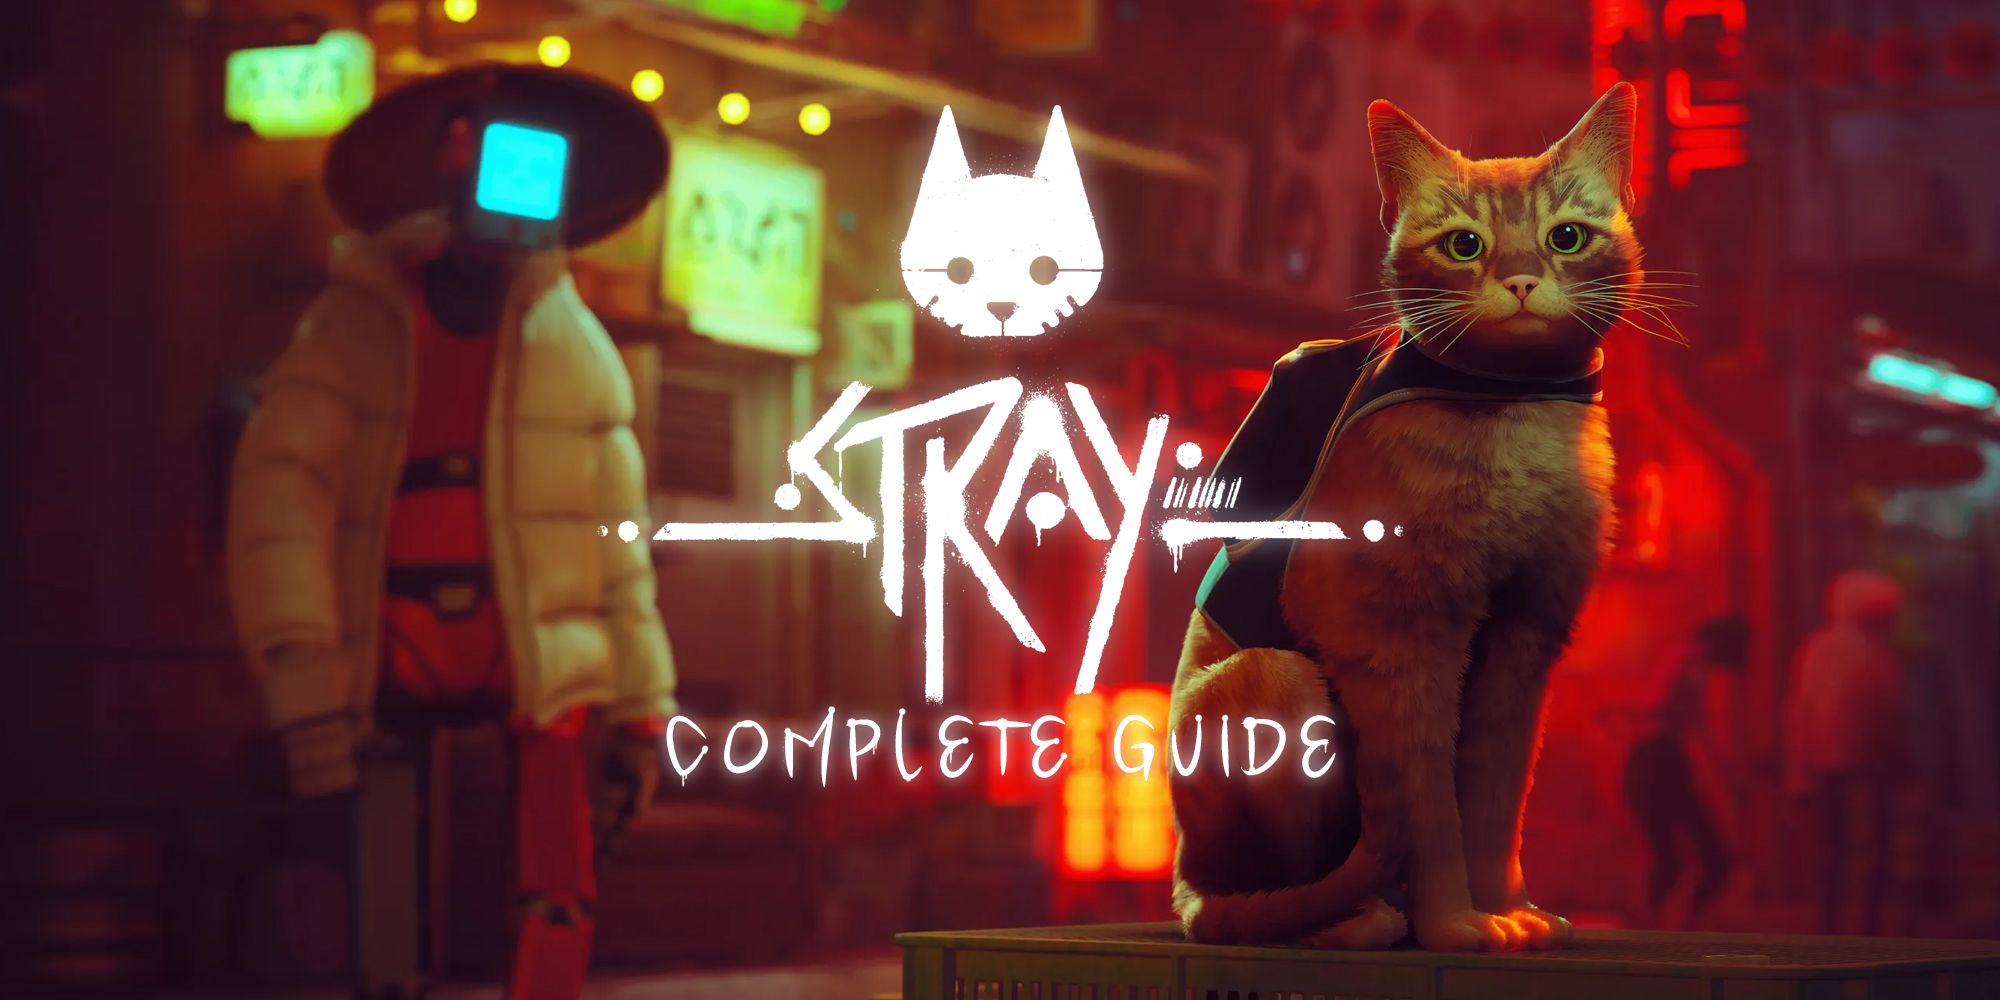 A complete guide to Stray